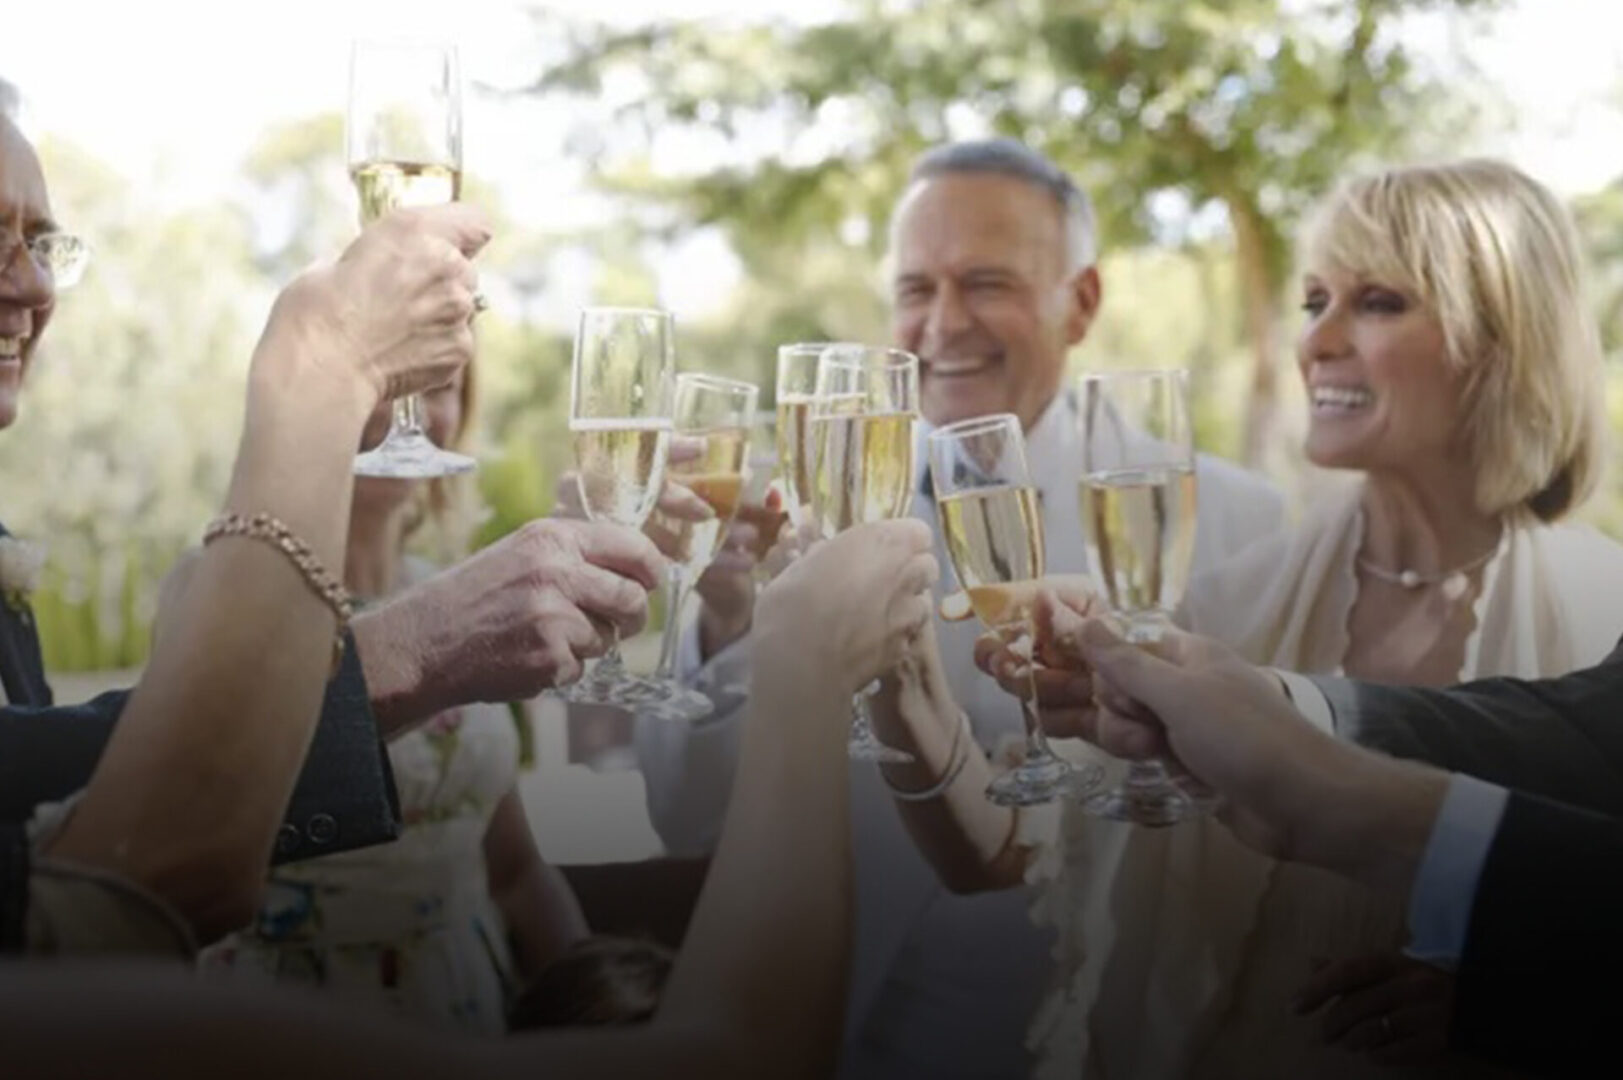 A group of people holding champagne glasses in their hands.